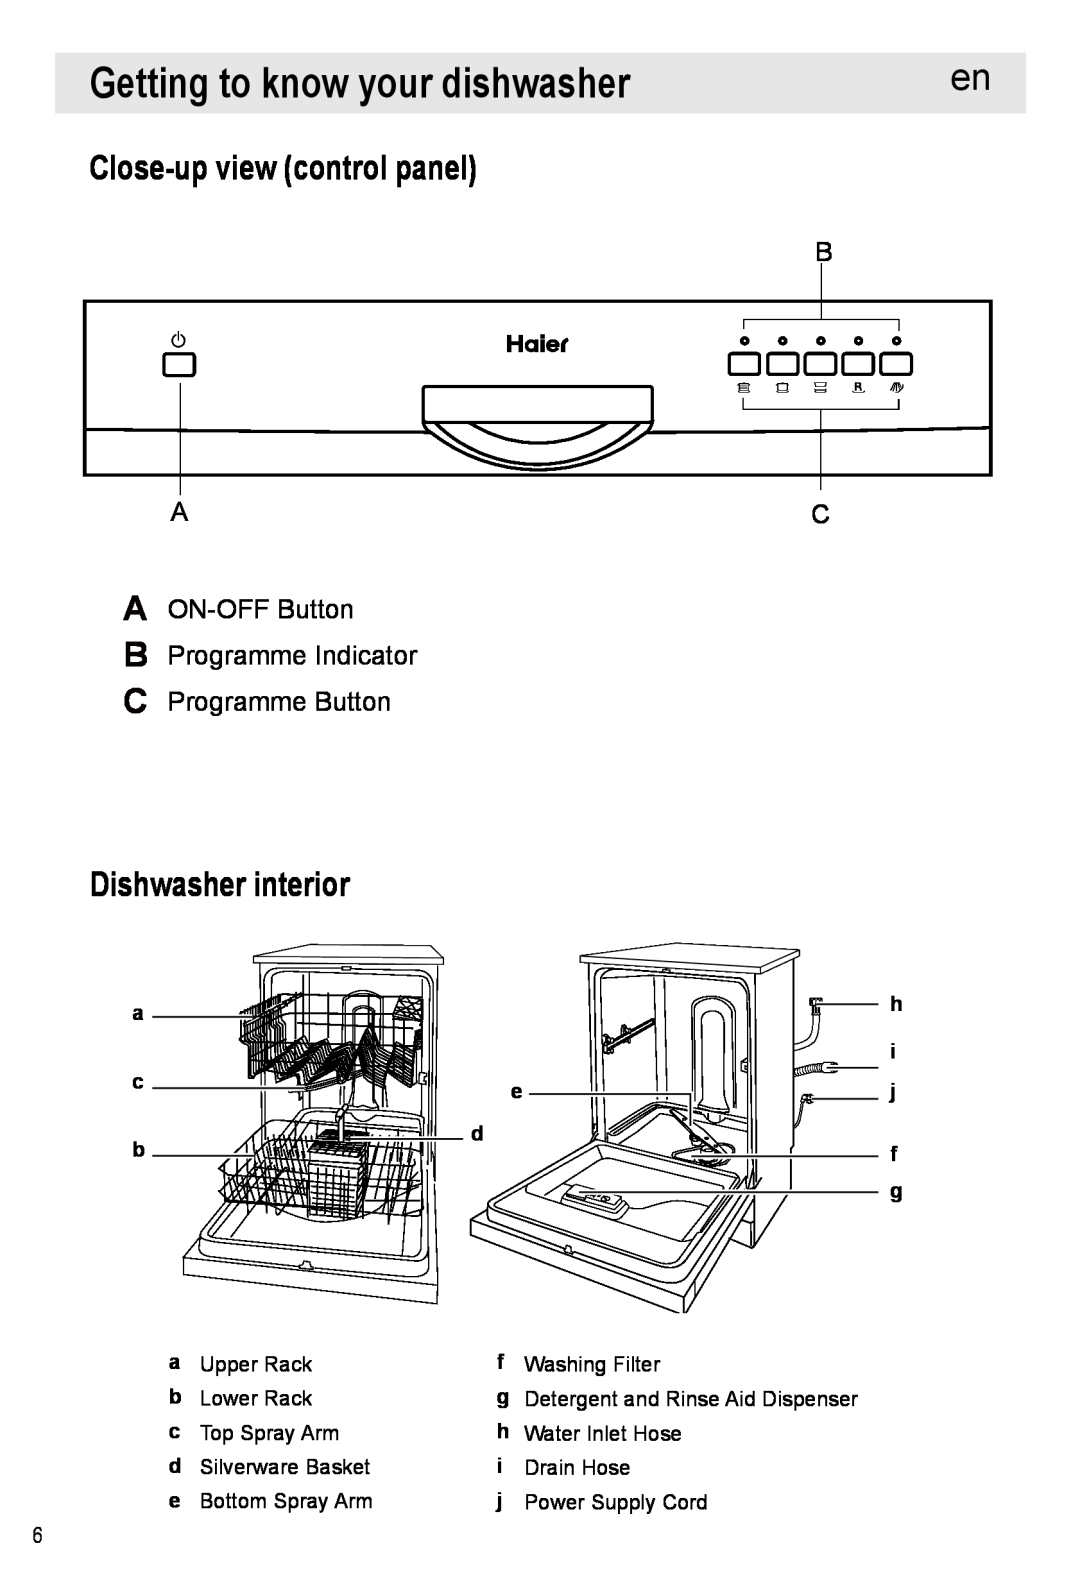 Haier HDW12-SFE1 Getting to know your dishwasher, Close-upview control panel, Dishwasher interior, Programme Button, A B C 